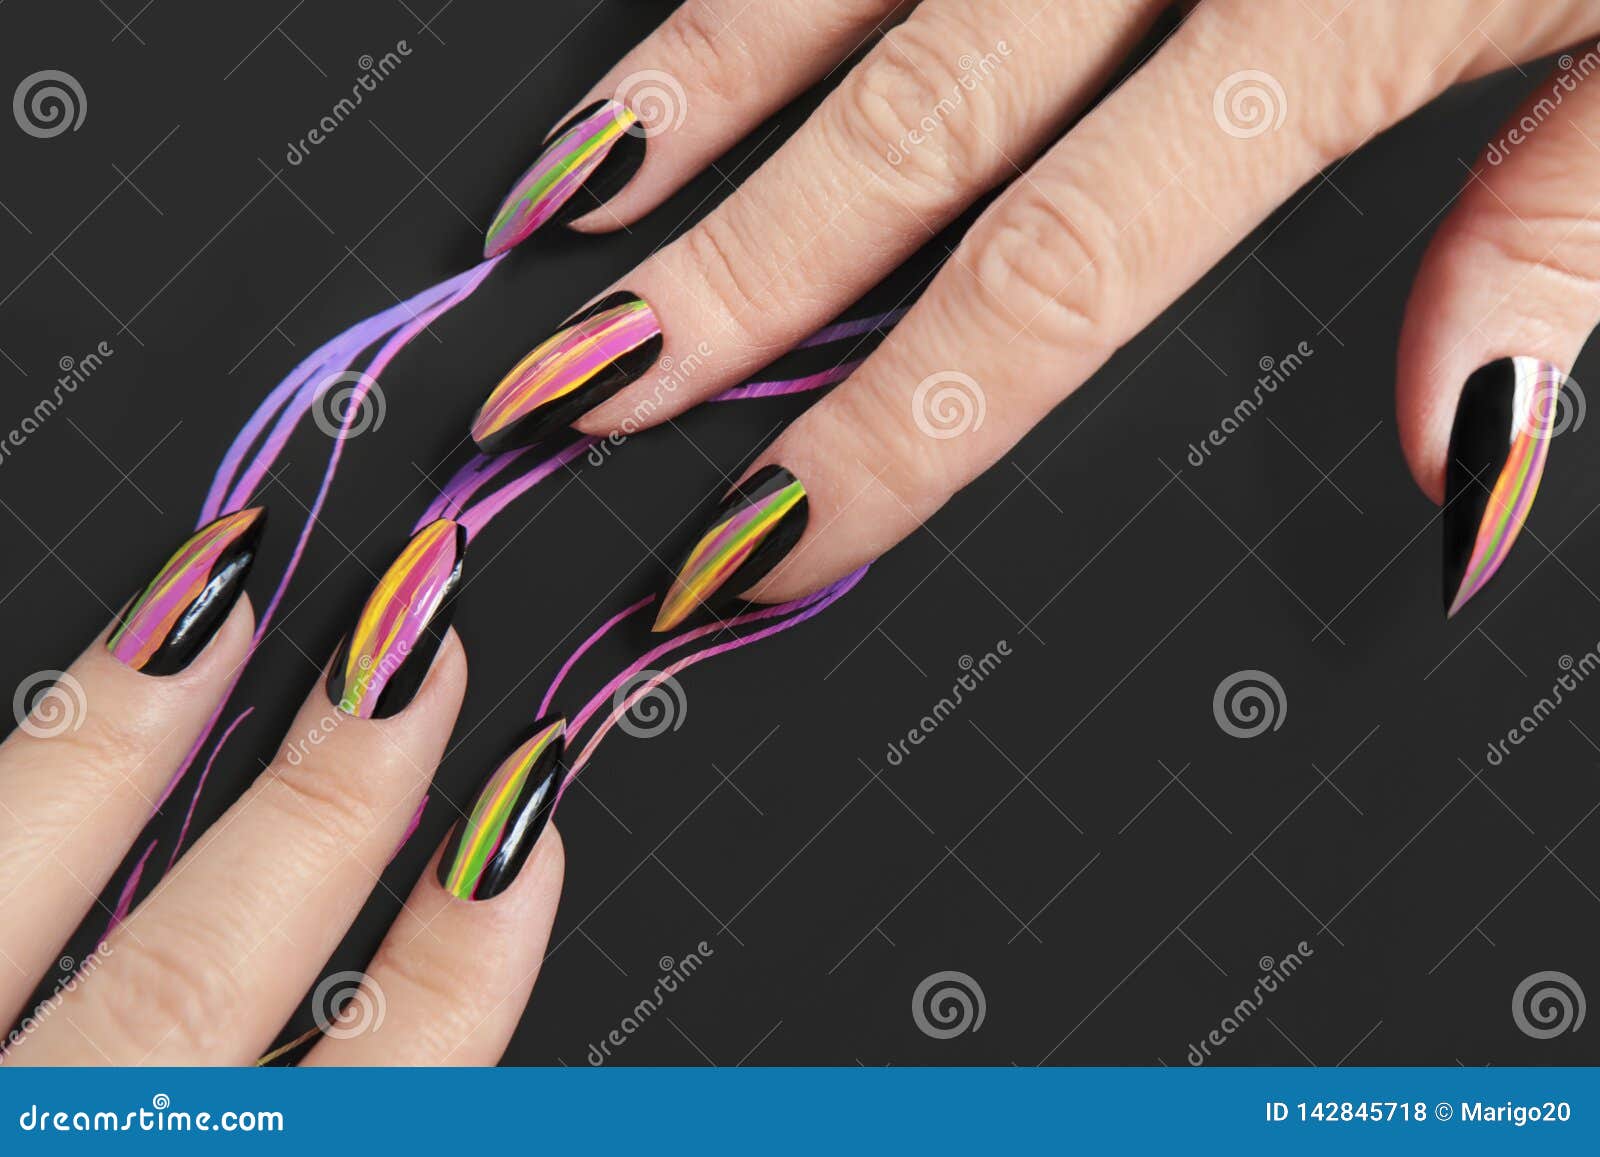 Colorful Bright Manicure with Different Sharp Shape of Nails Framed with  Black  Art Stock Photo - Image of green, bright: 142845718